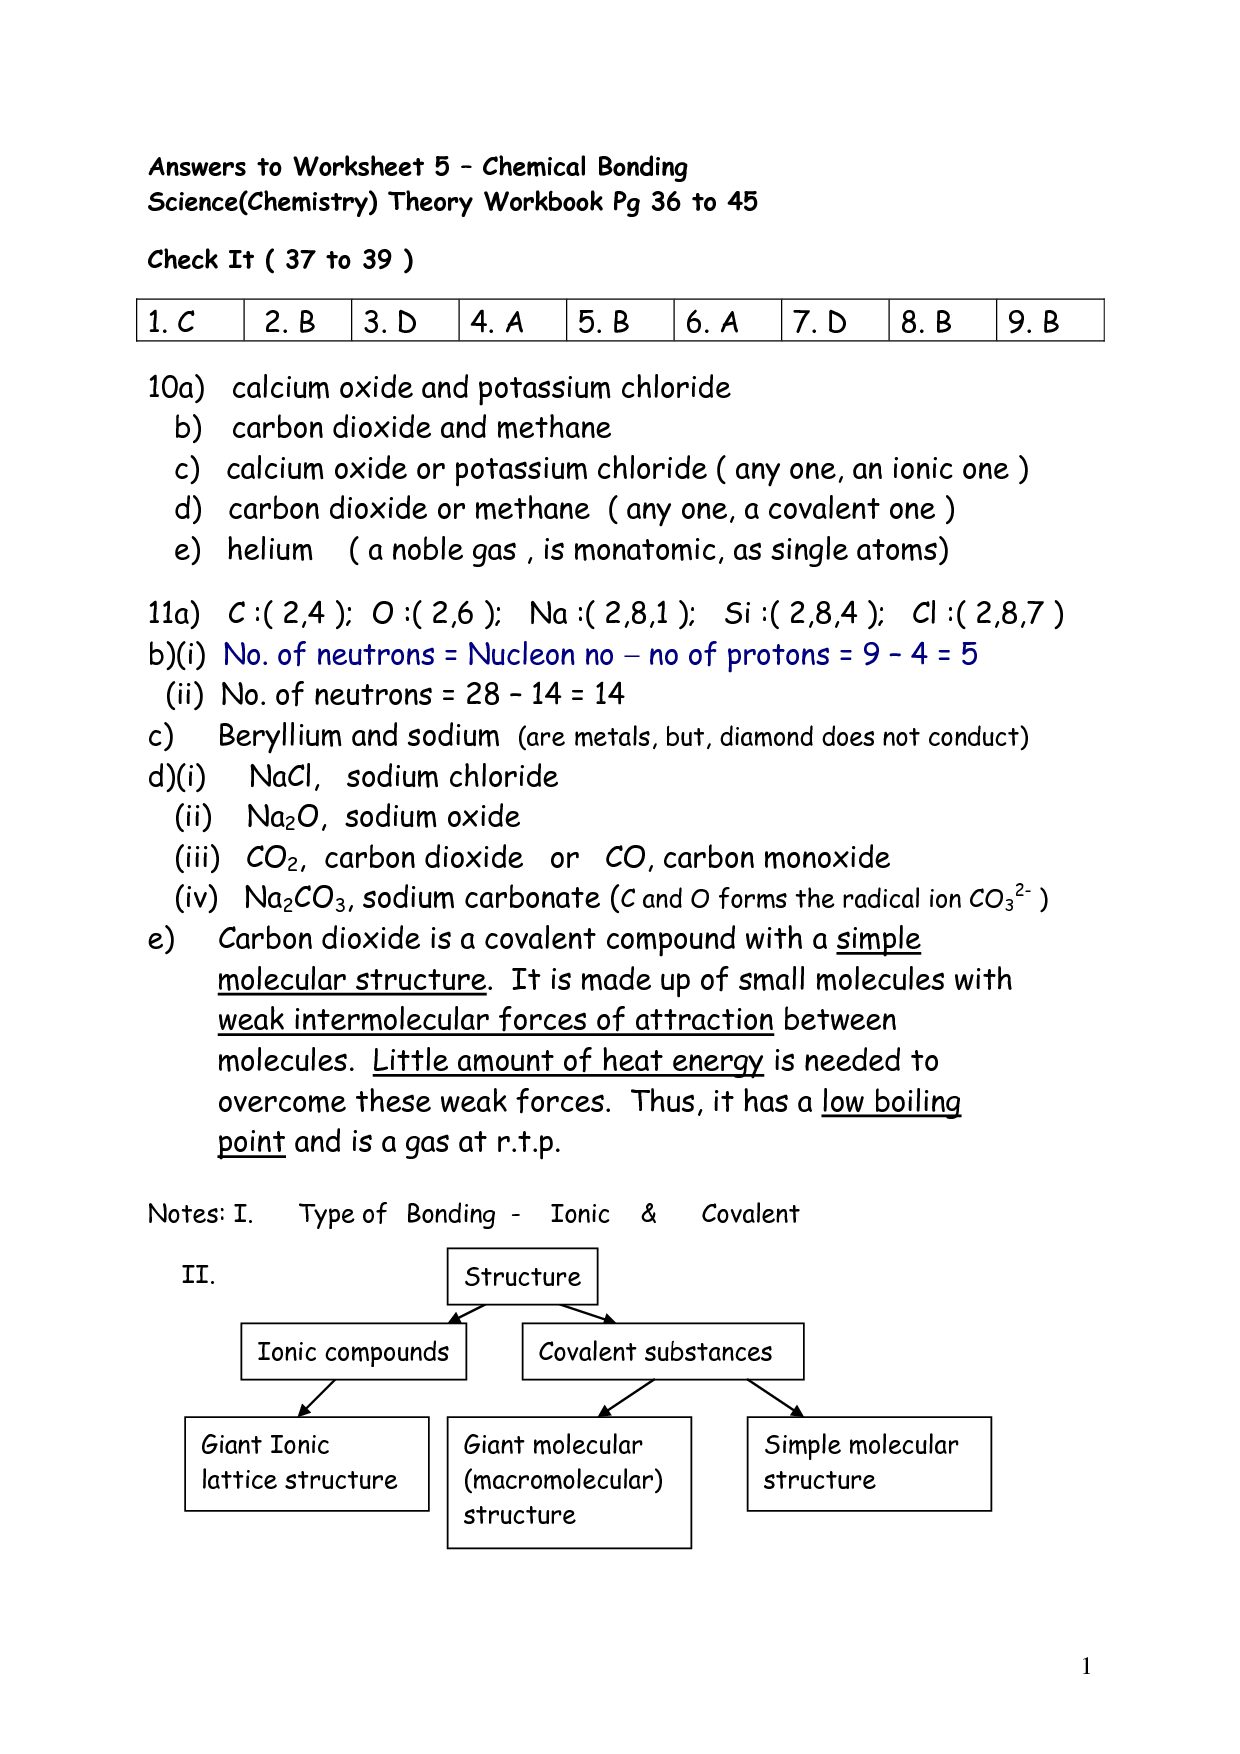 12-best-images-of-empirical-formula-worksheet-with-answers-molecular-and-empirical-formula